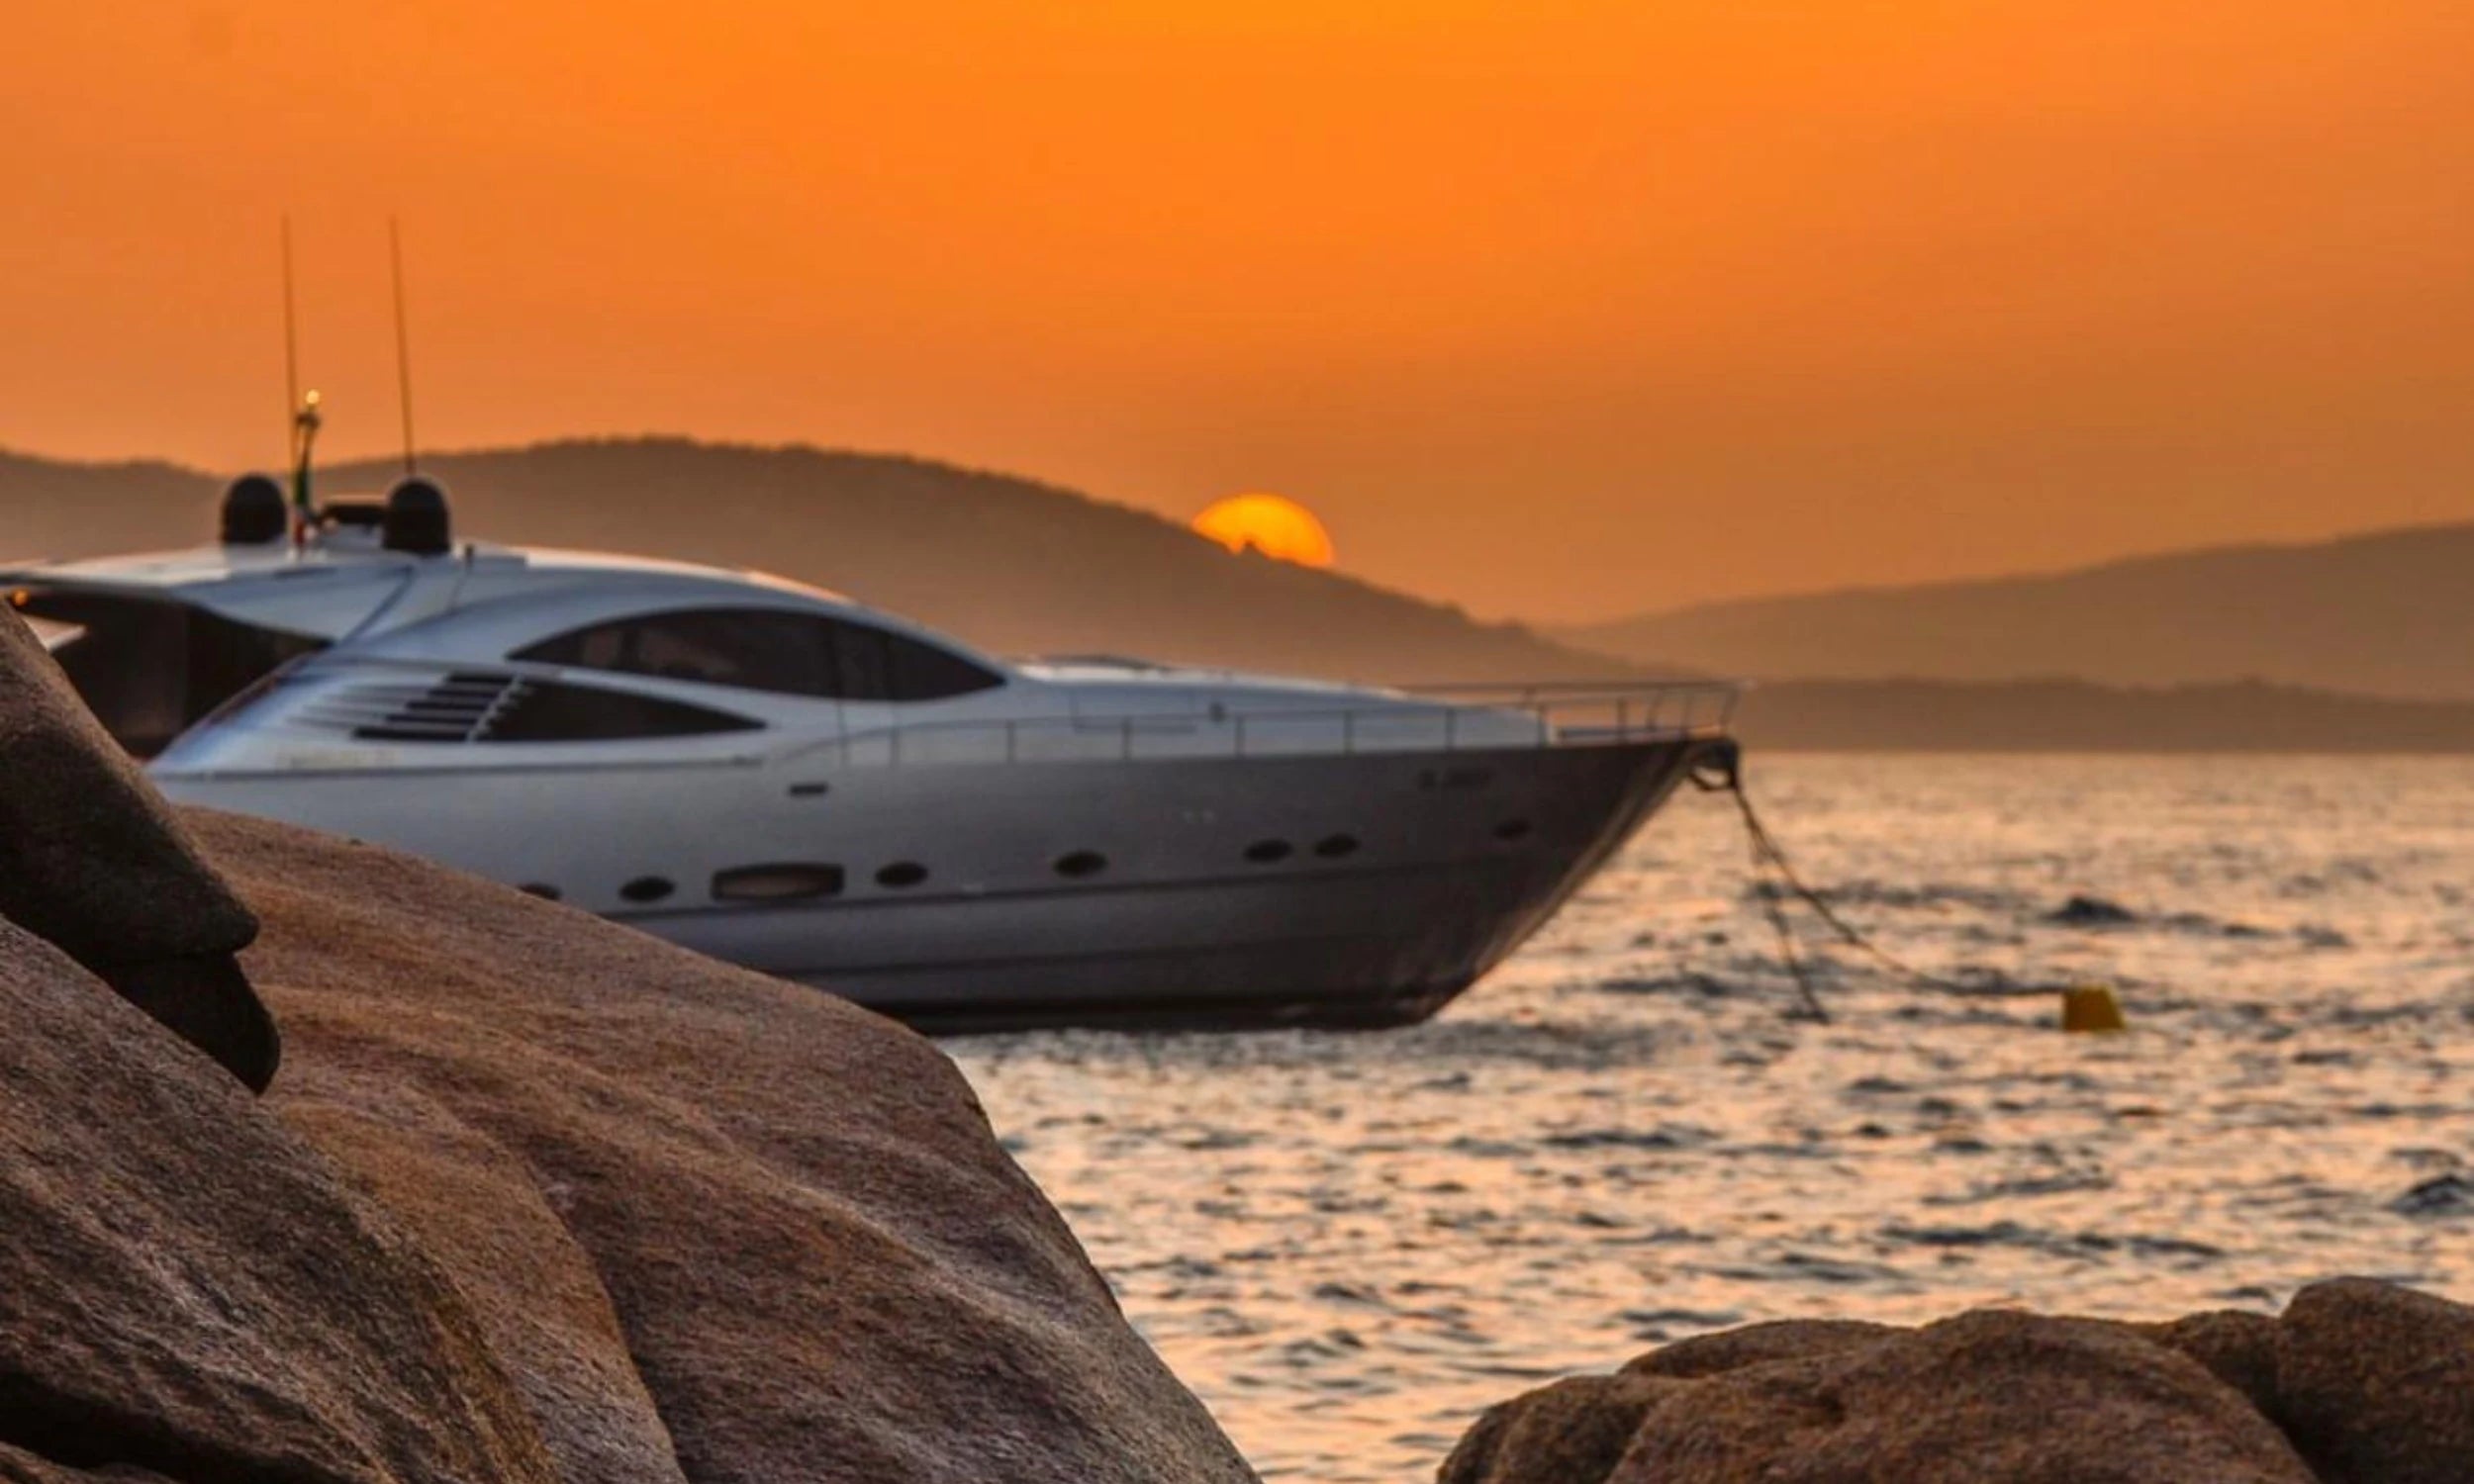 The most famous yachts that have sailed the seas of the Costa Smeralda